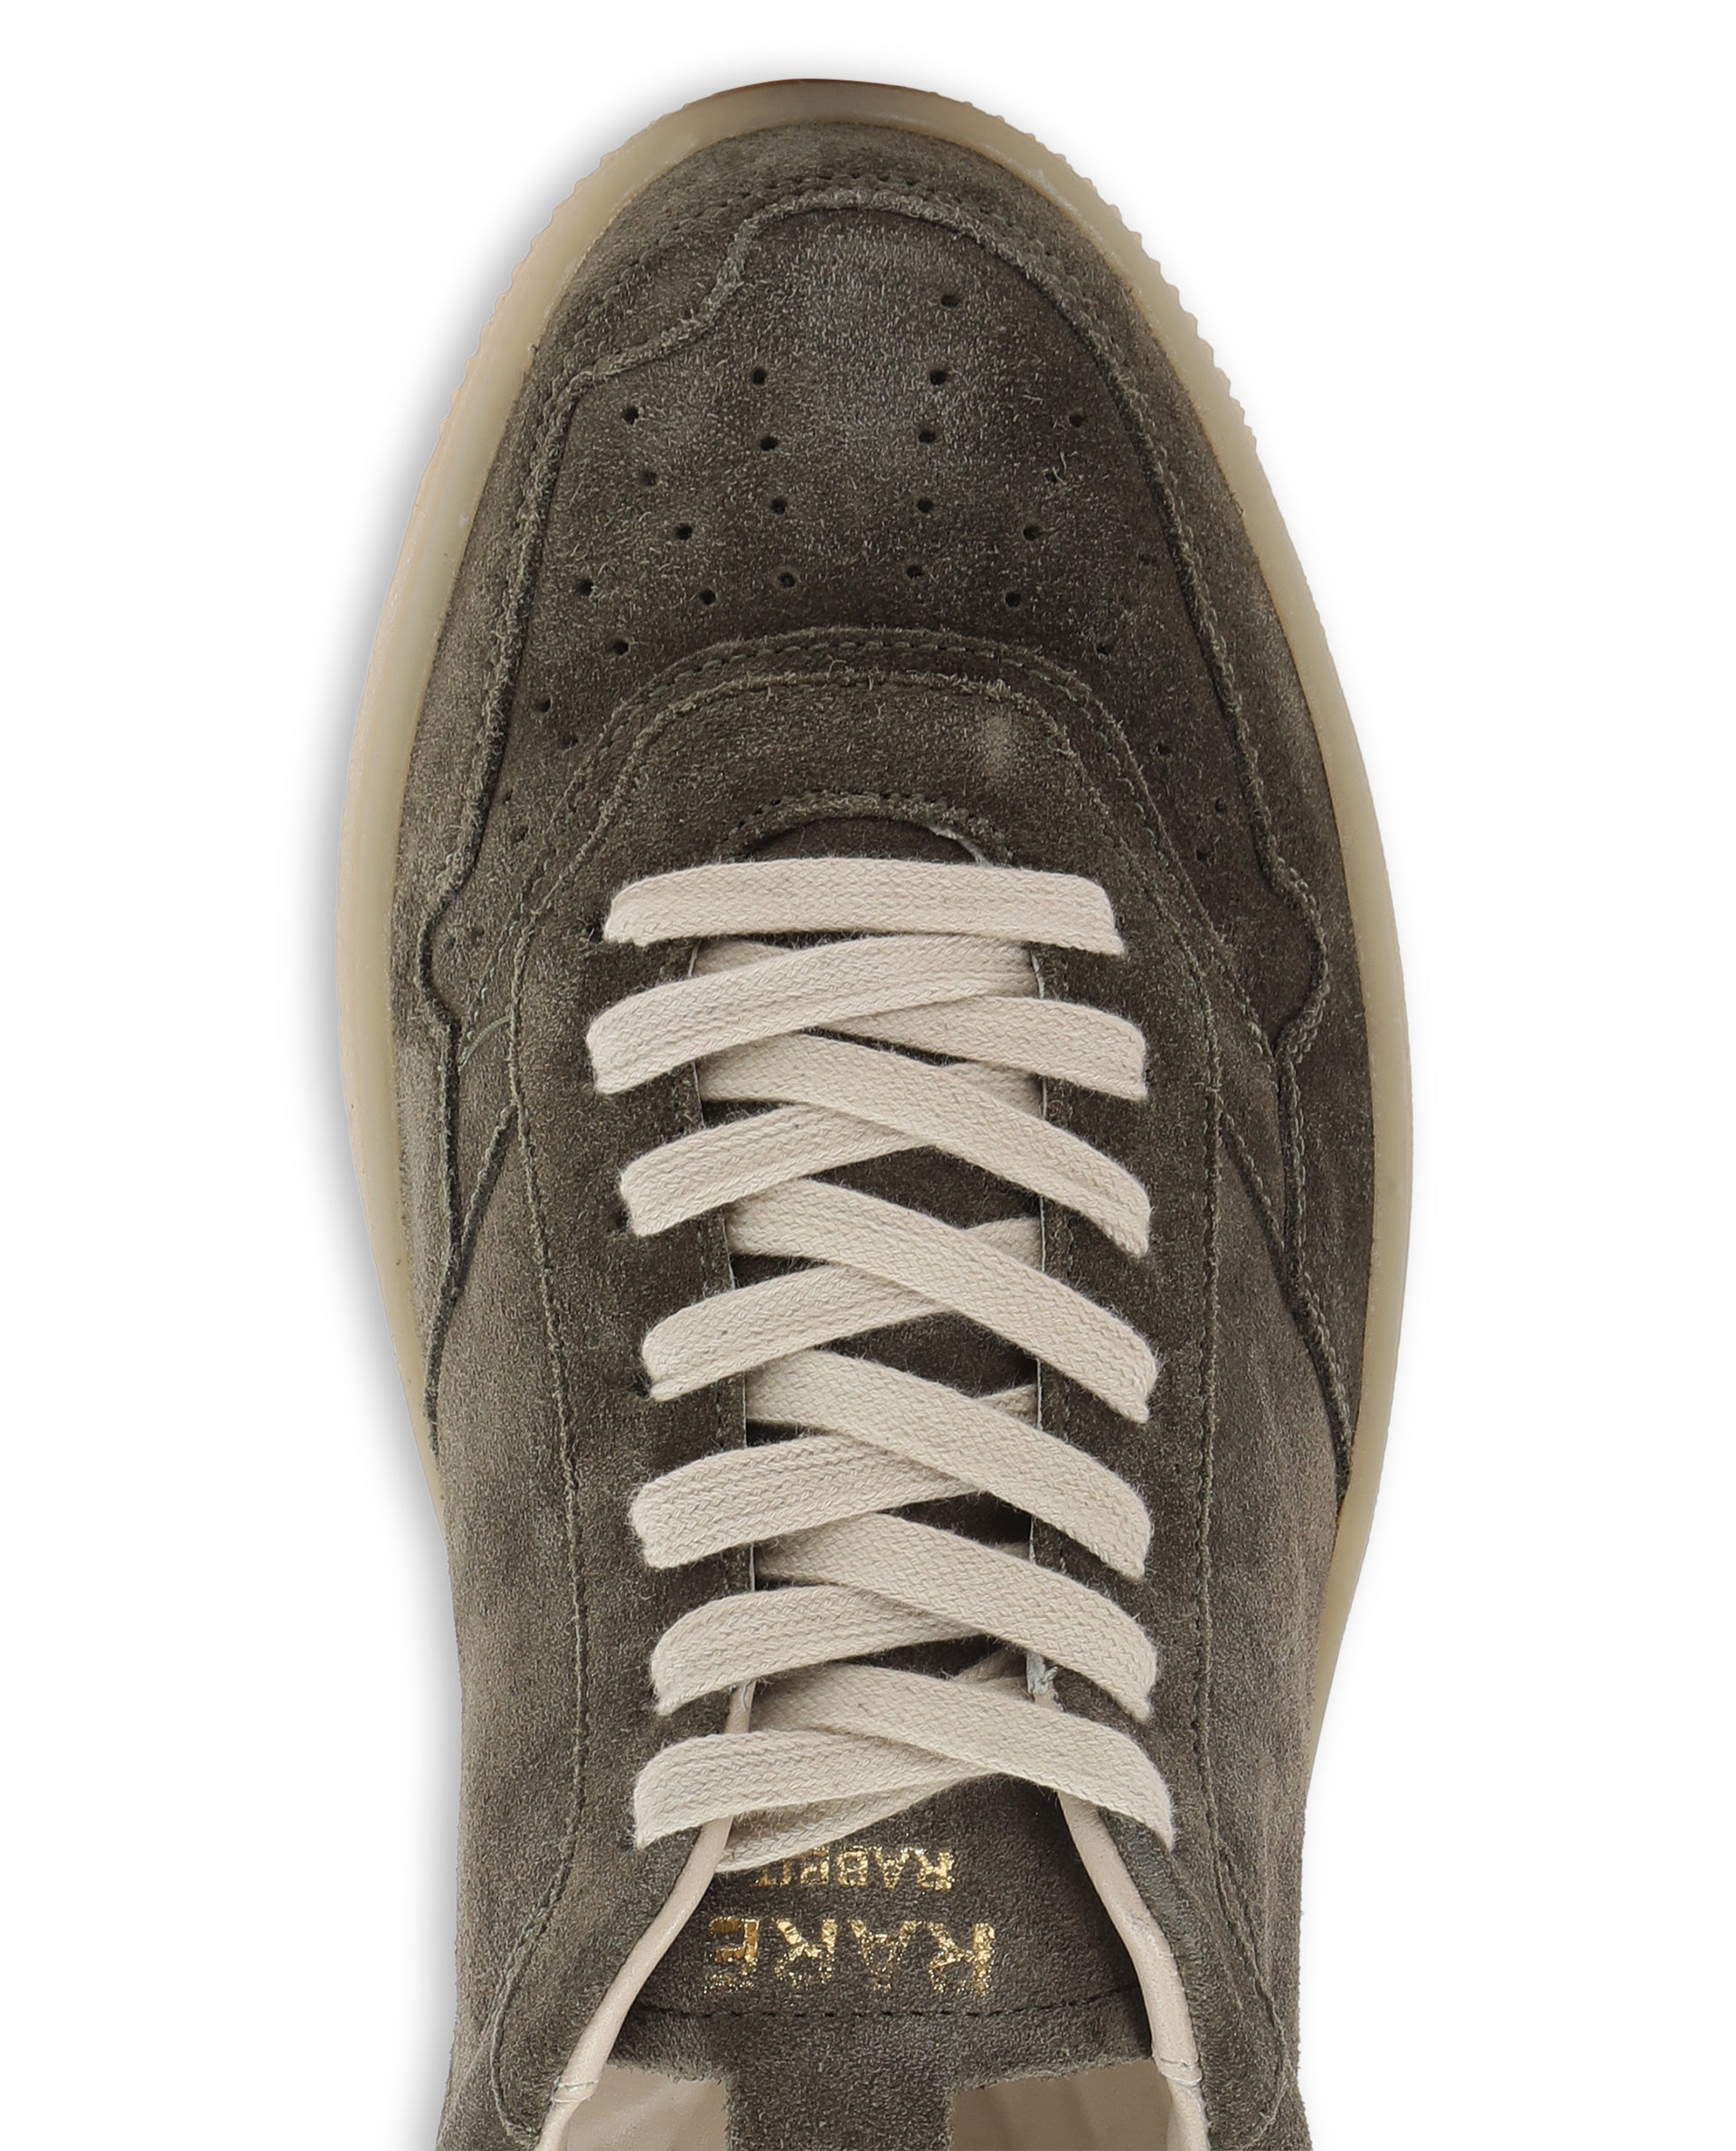 Converse One Star Pro Workwear Olive Green Skate Shoes | Zumiez